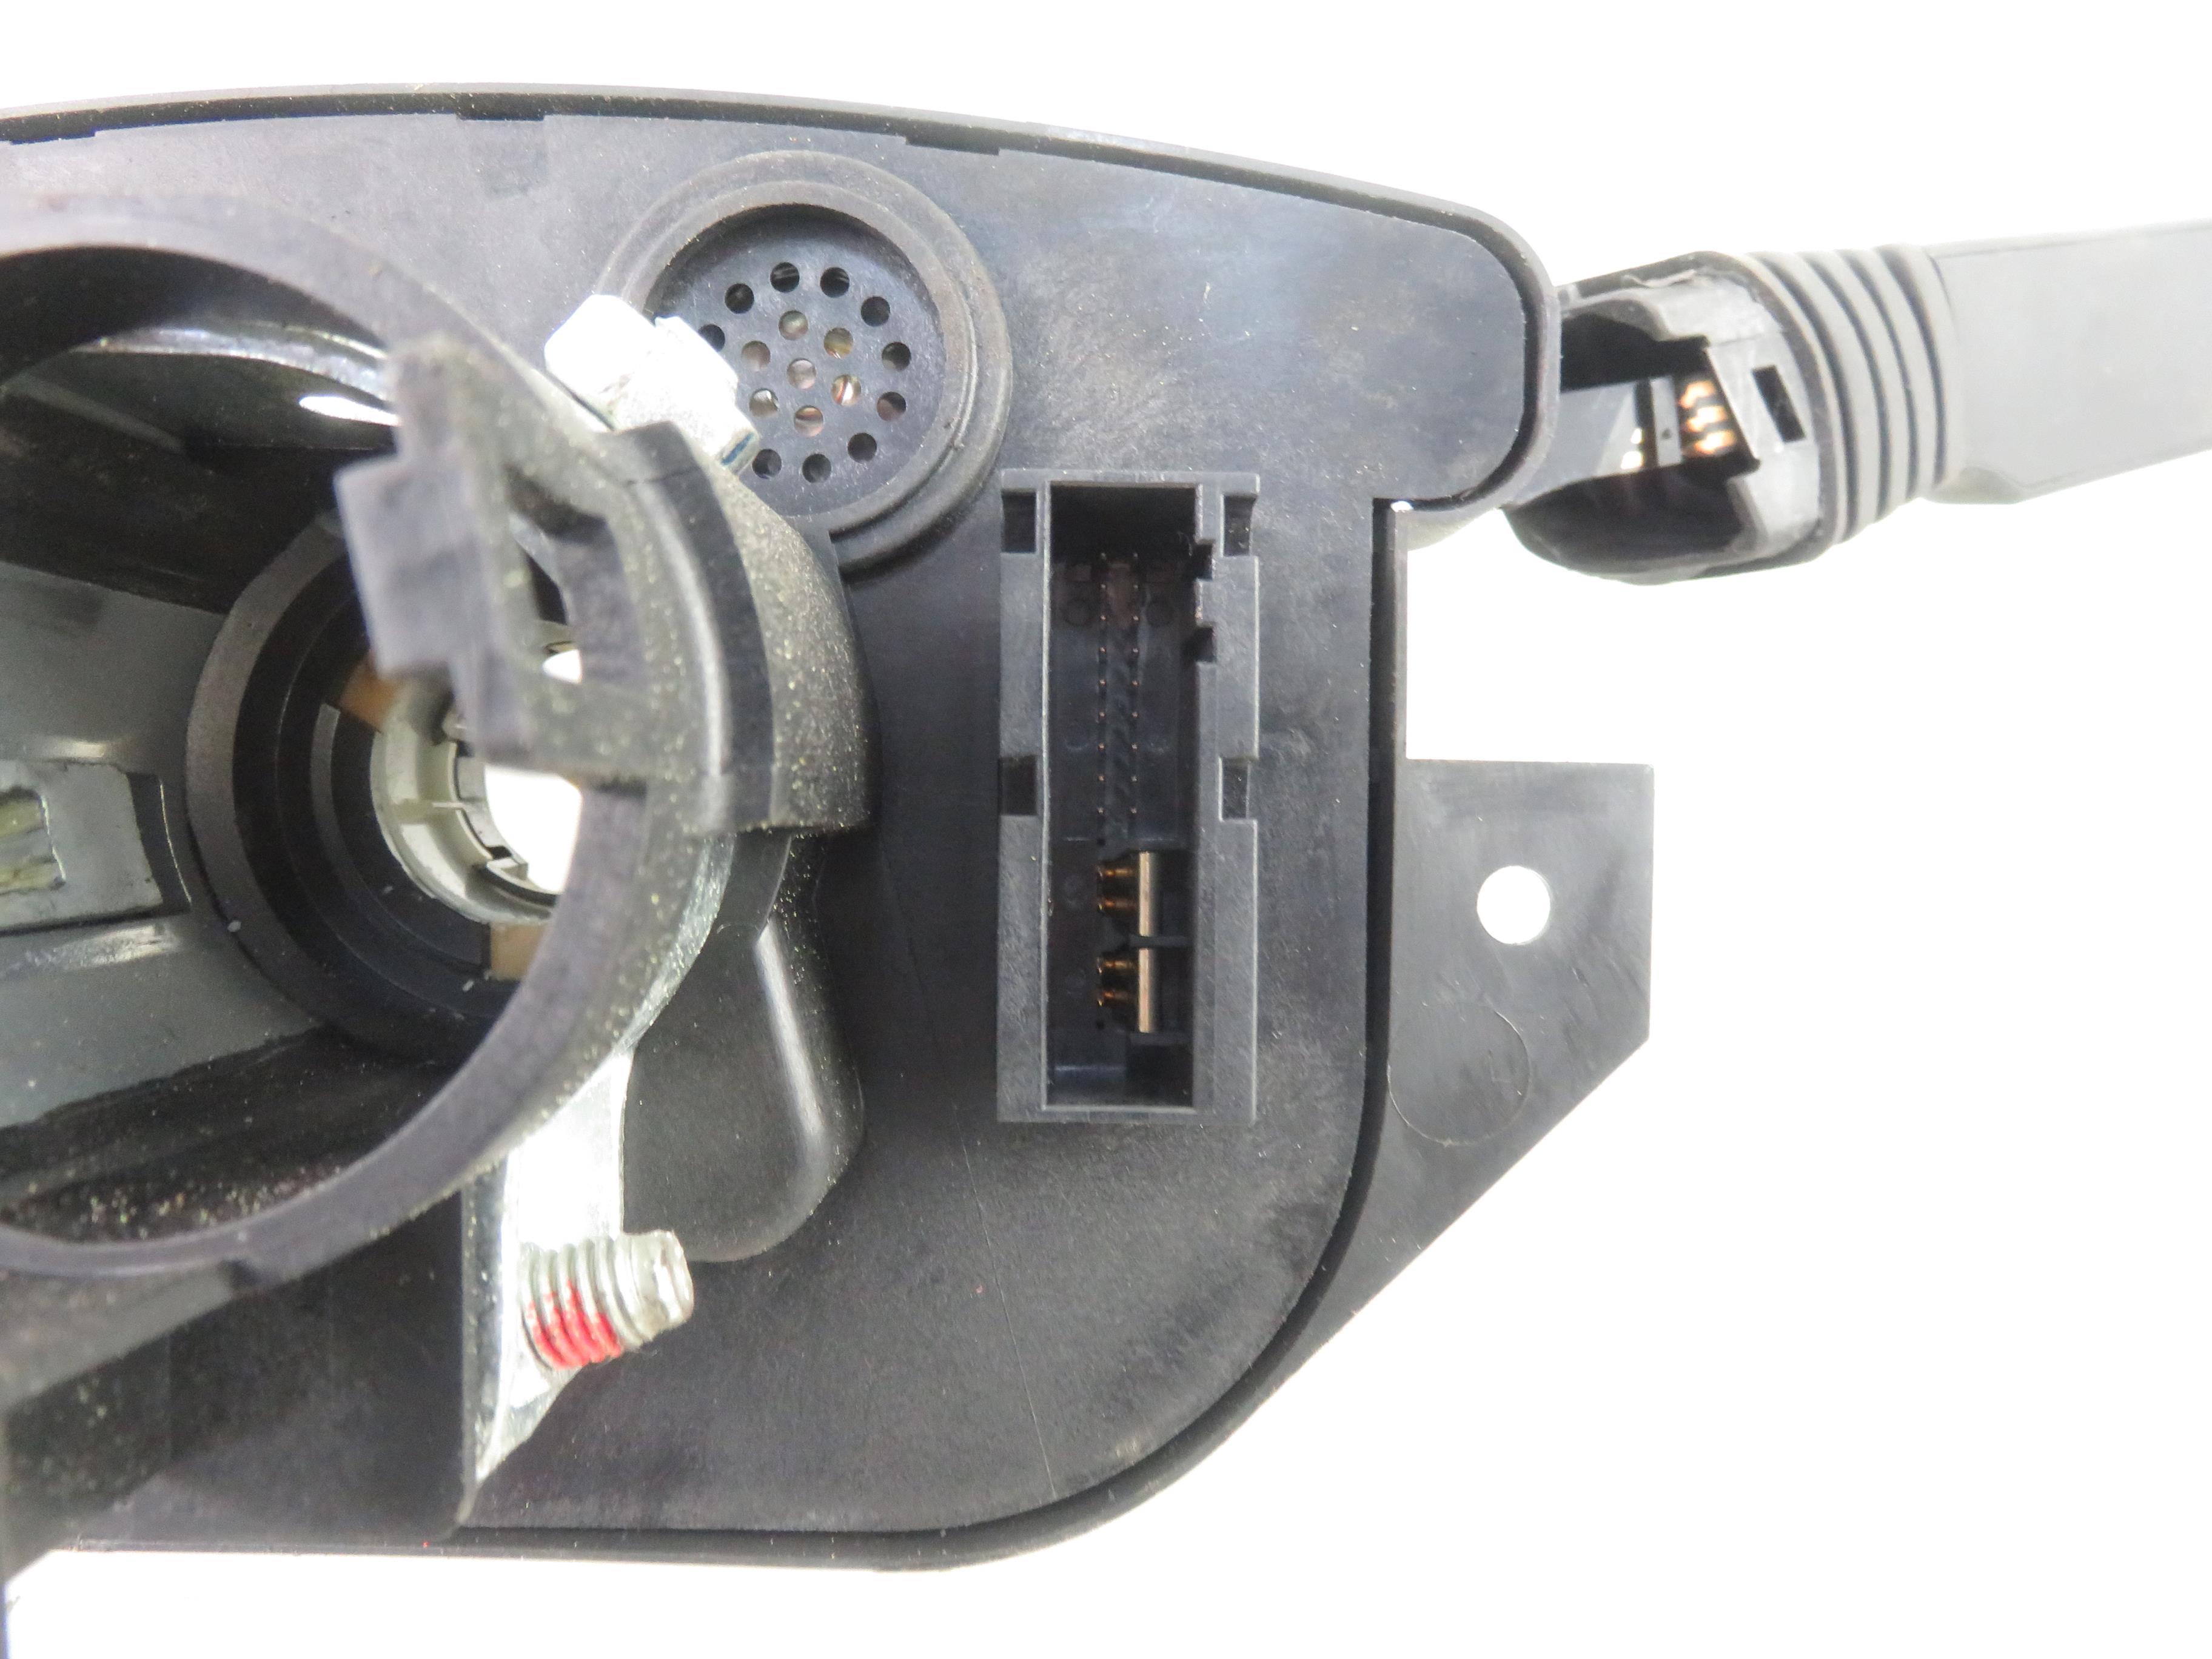 OPEL Vectra C (2002-2005) Switches 13162134DL 25191865